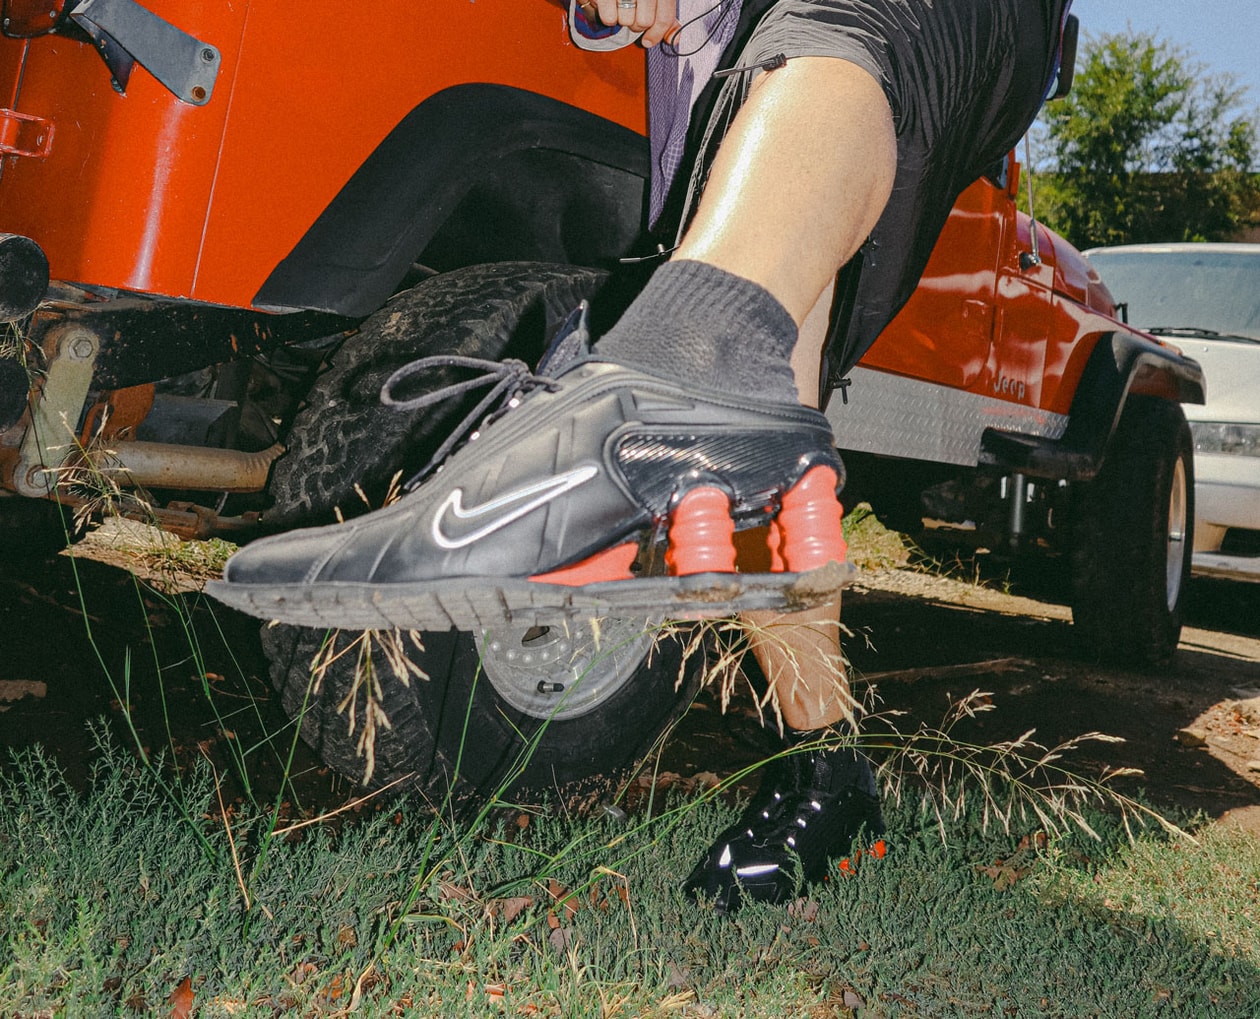 Martine Rose's New Nike Shox Collaboration Pays Homage to Women in